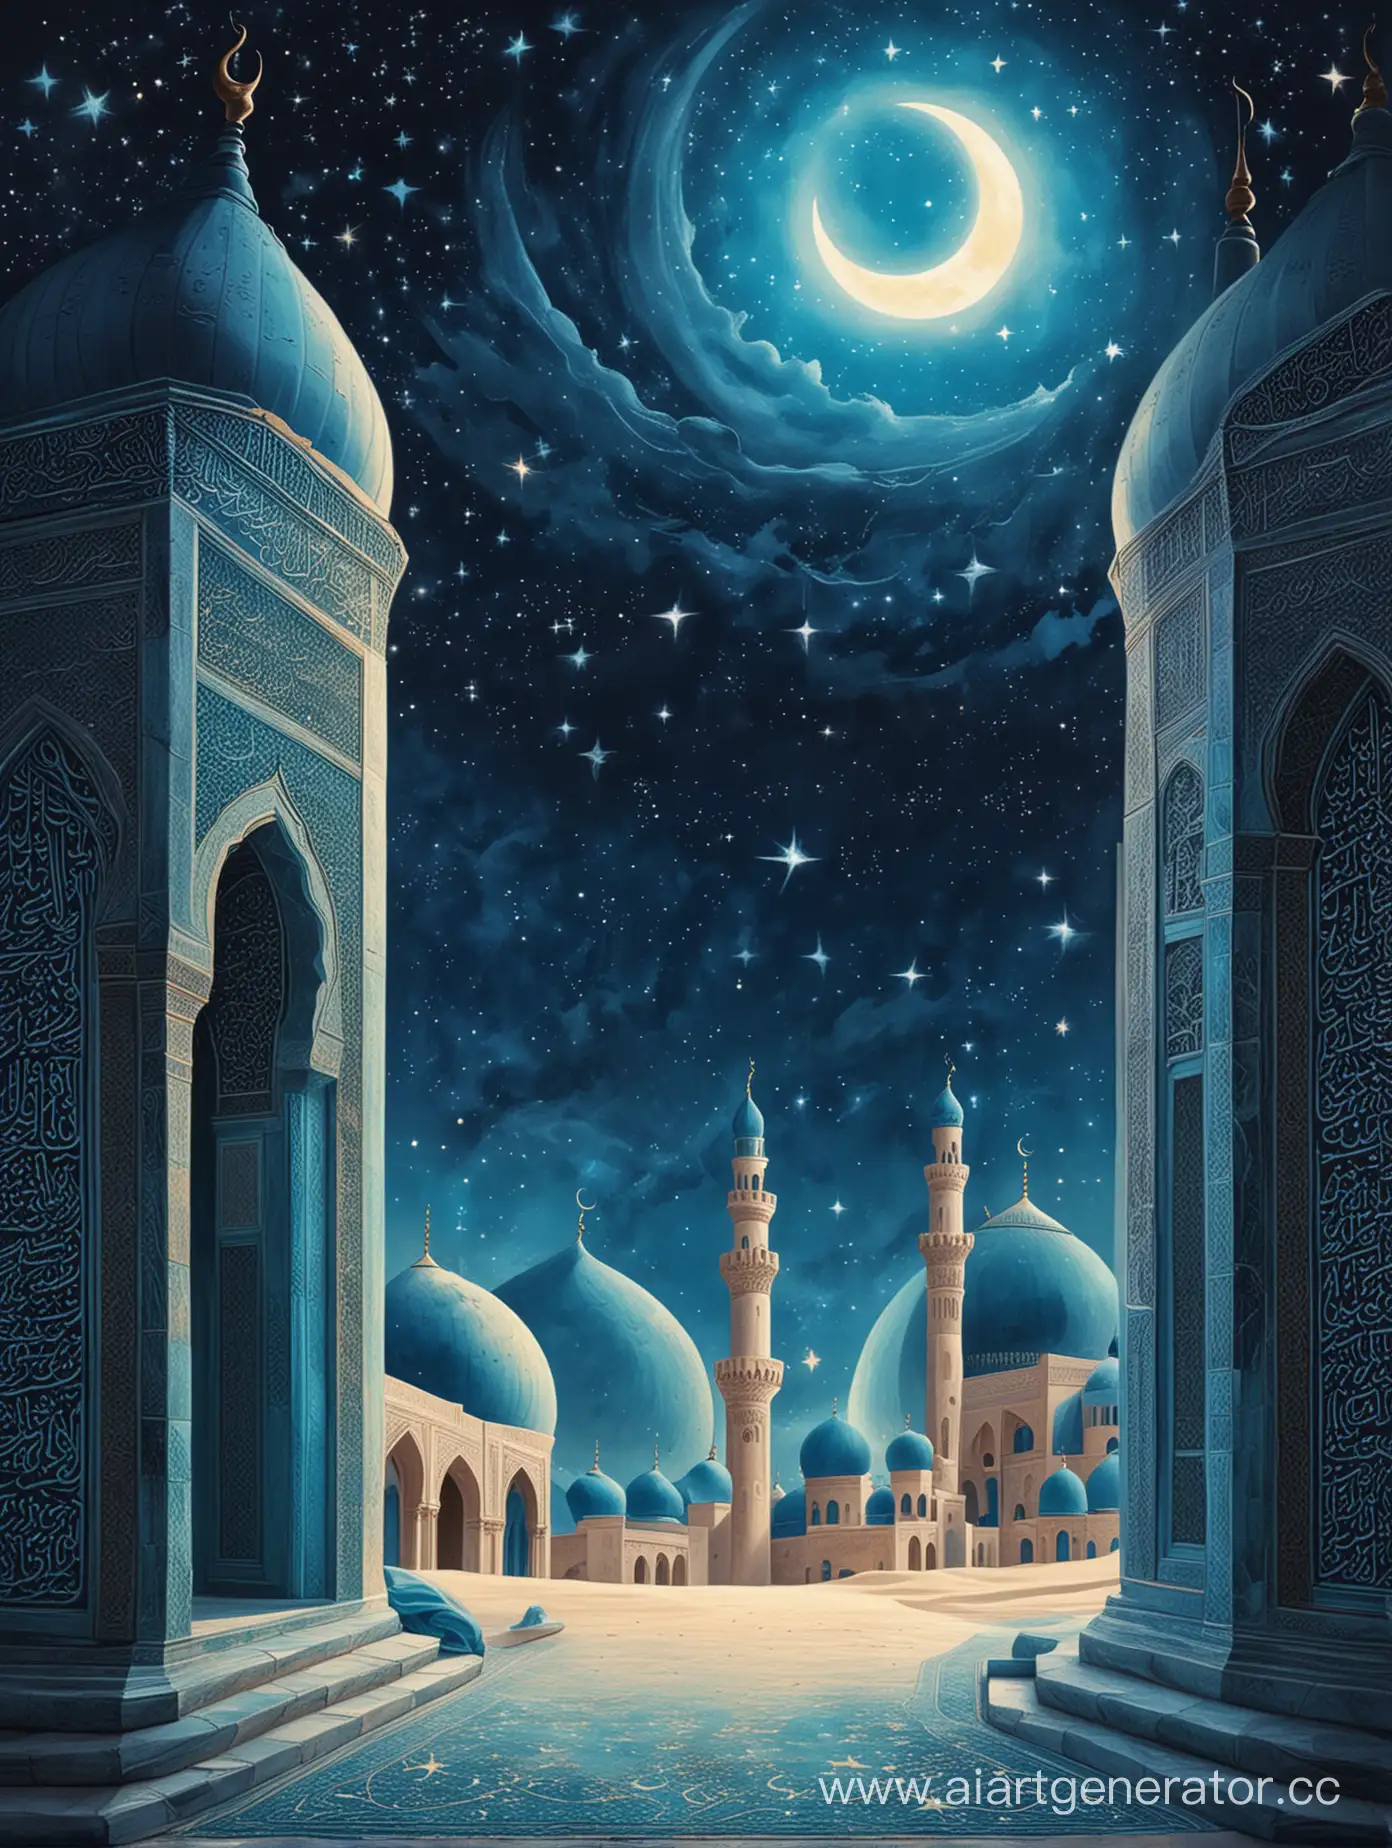 Ramadan-Night-Sky-with-Crescent-Moon-and-Minaret-in-Blue-Hues